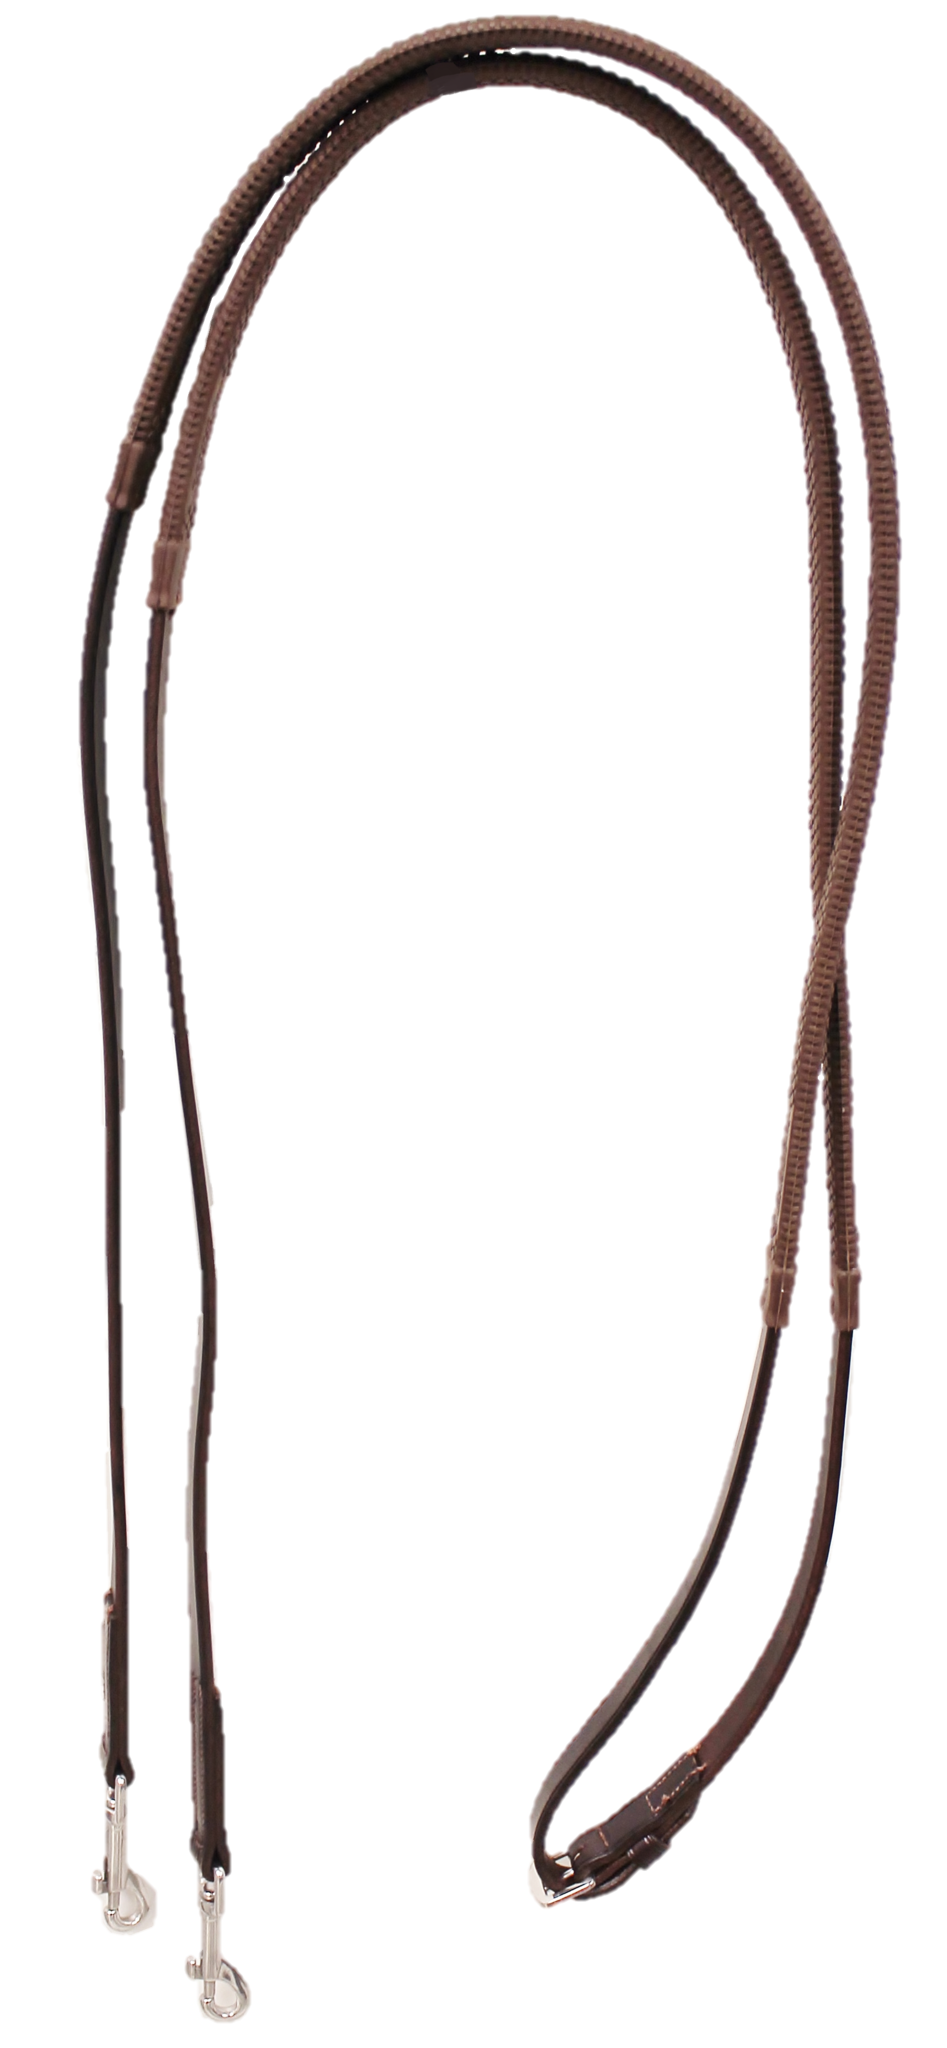 Walsh Rubber Training Reins - The Tack Shop of Lexington